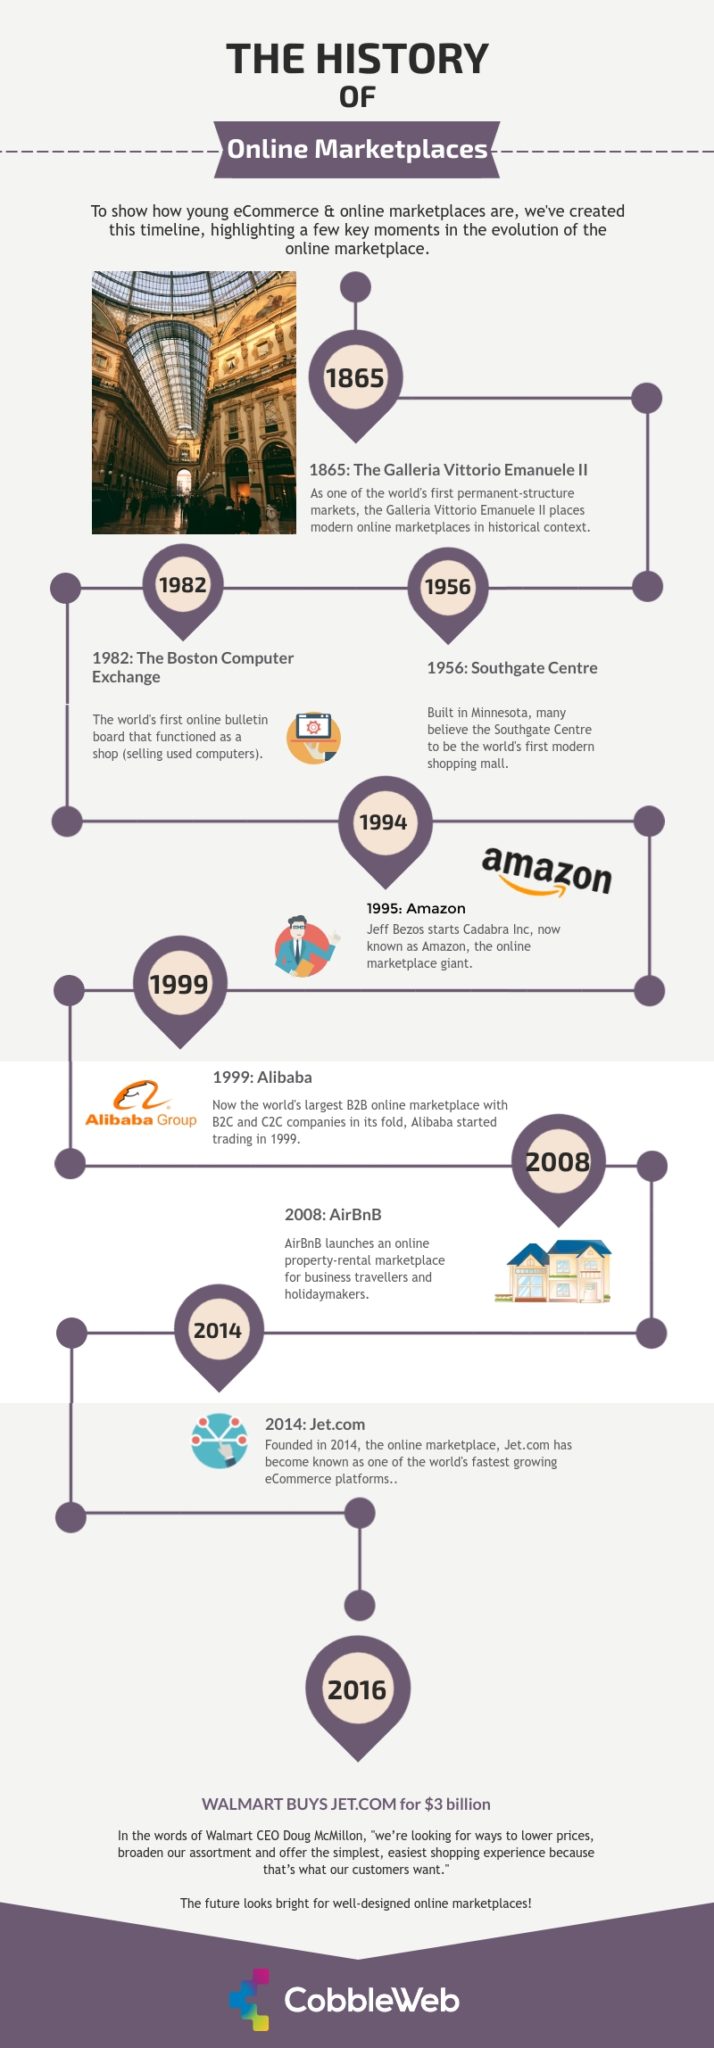 Infographic about the history of online marketplaces to show how young eCommerce really is